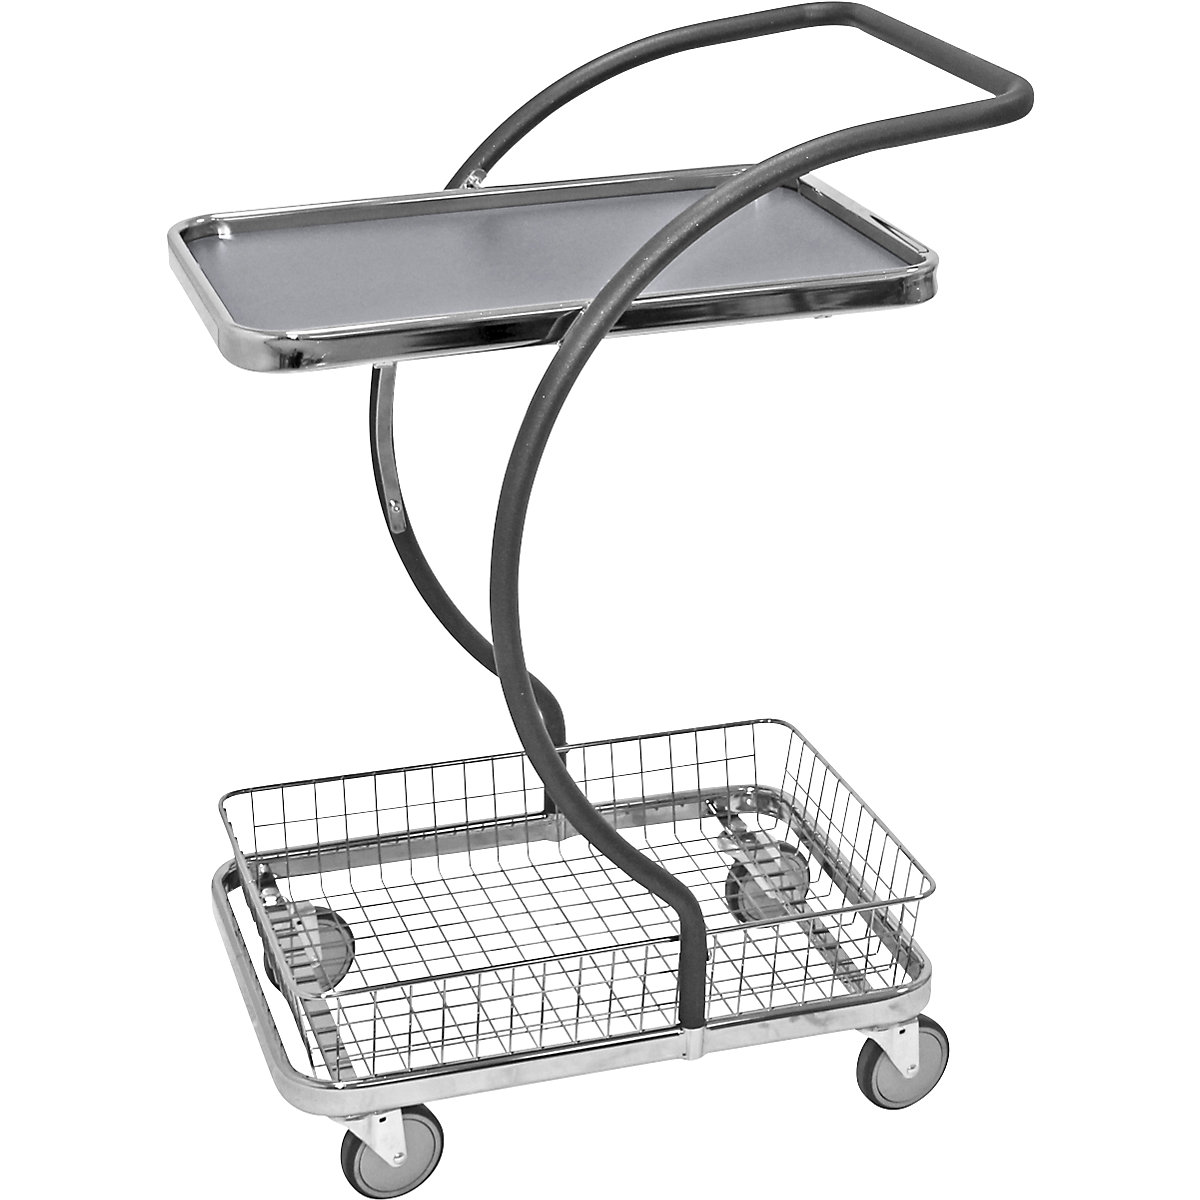 C-LINE shopping and table trolley – Kongamek, with 1 shelf, 1 stainless steel mesh tray, shelf heights 160, 630 mm, 2+ items-6